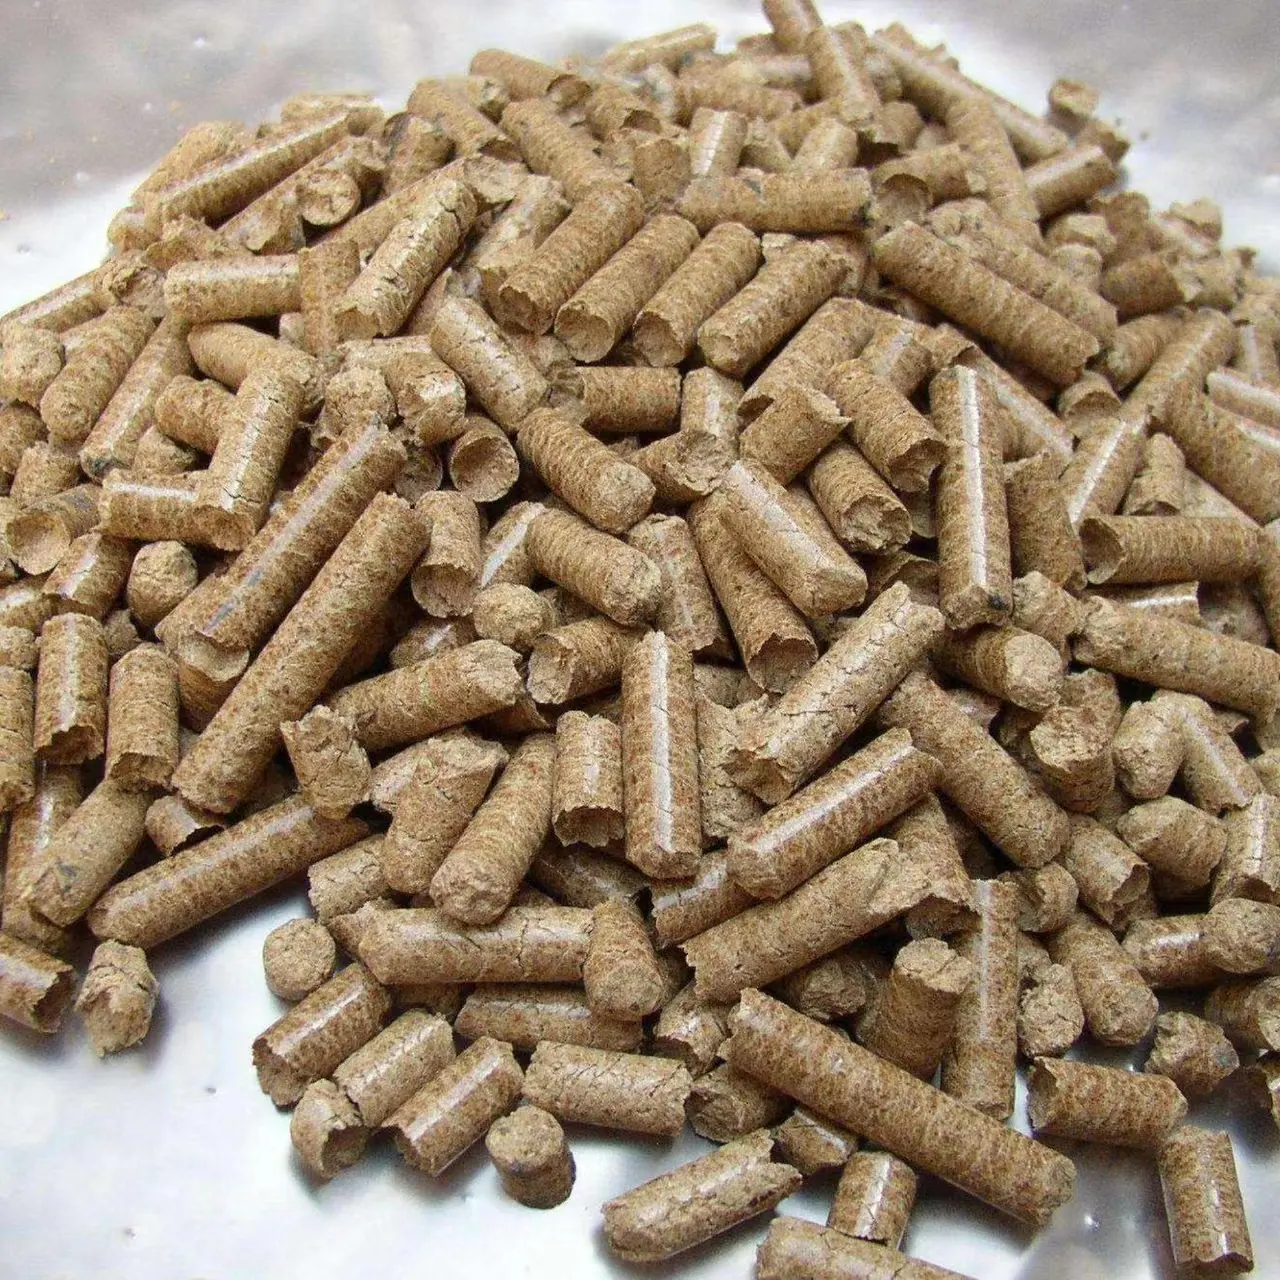 Wholesale Wood Pellets with High Quality Biomass Burners Energy Activated Carbon firewood bamboo sawdust